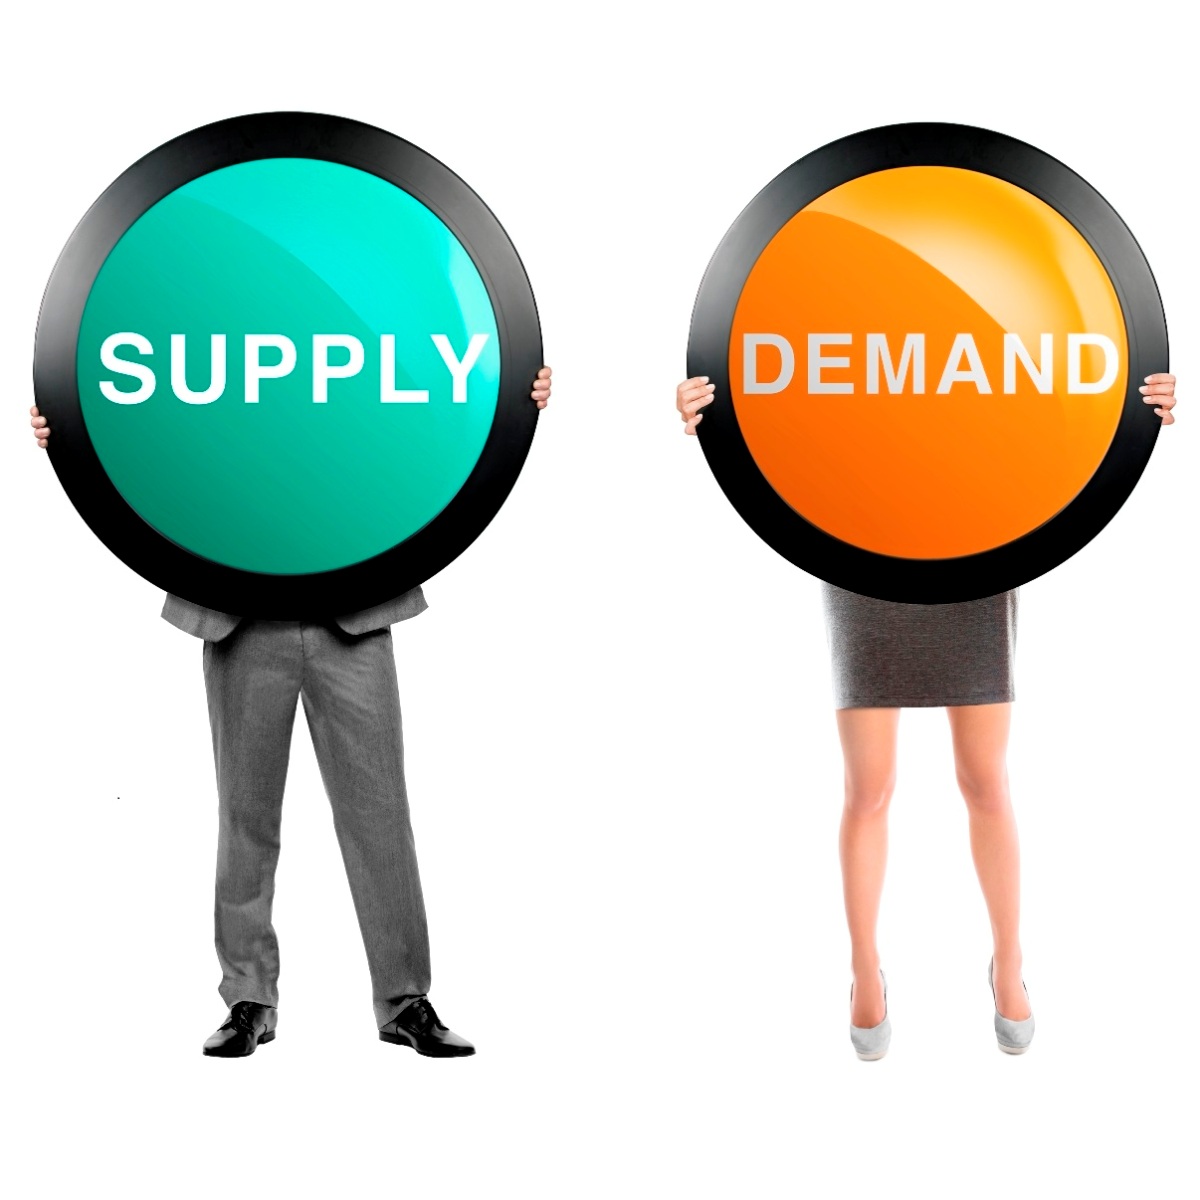 How Well Does Your Company Integrate Demand and Supply?